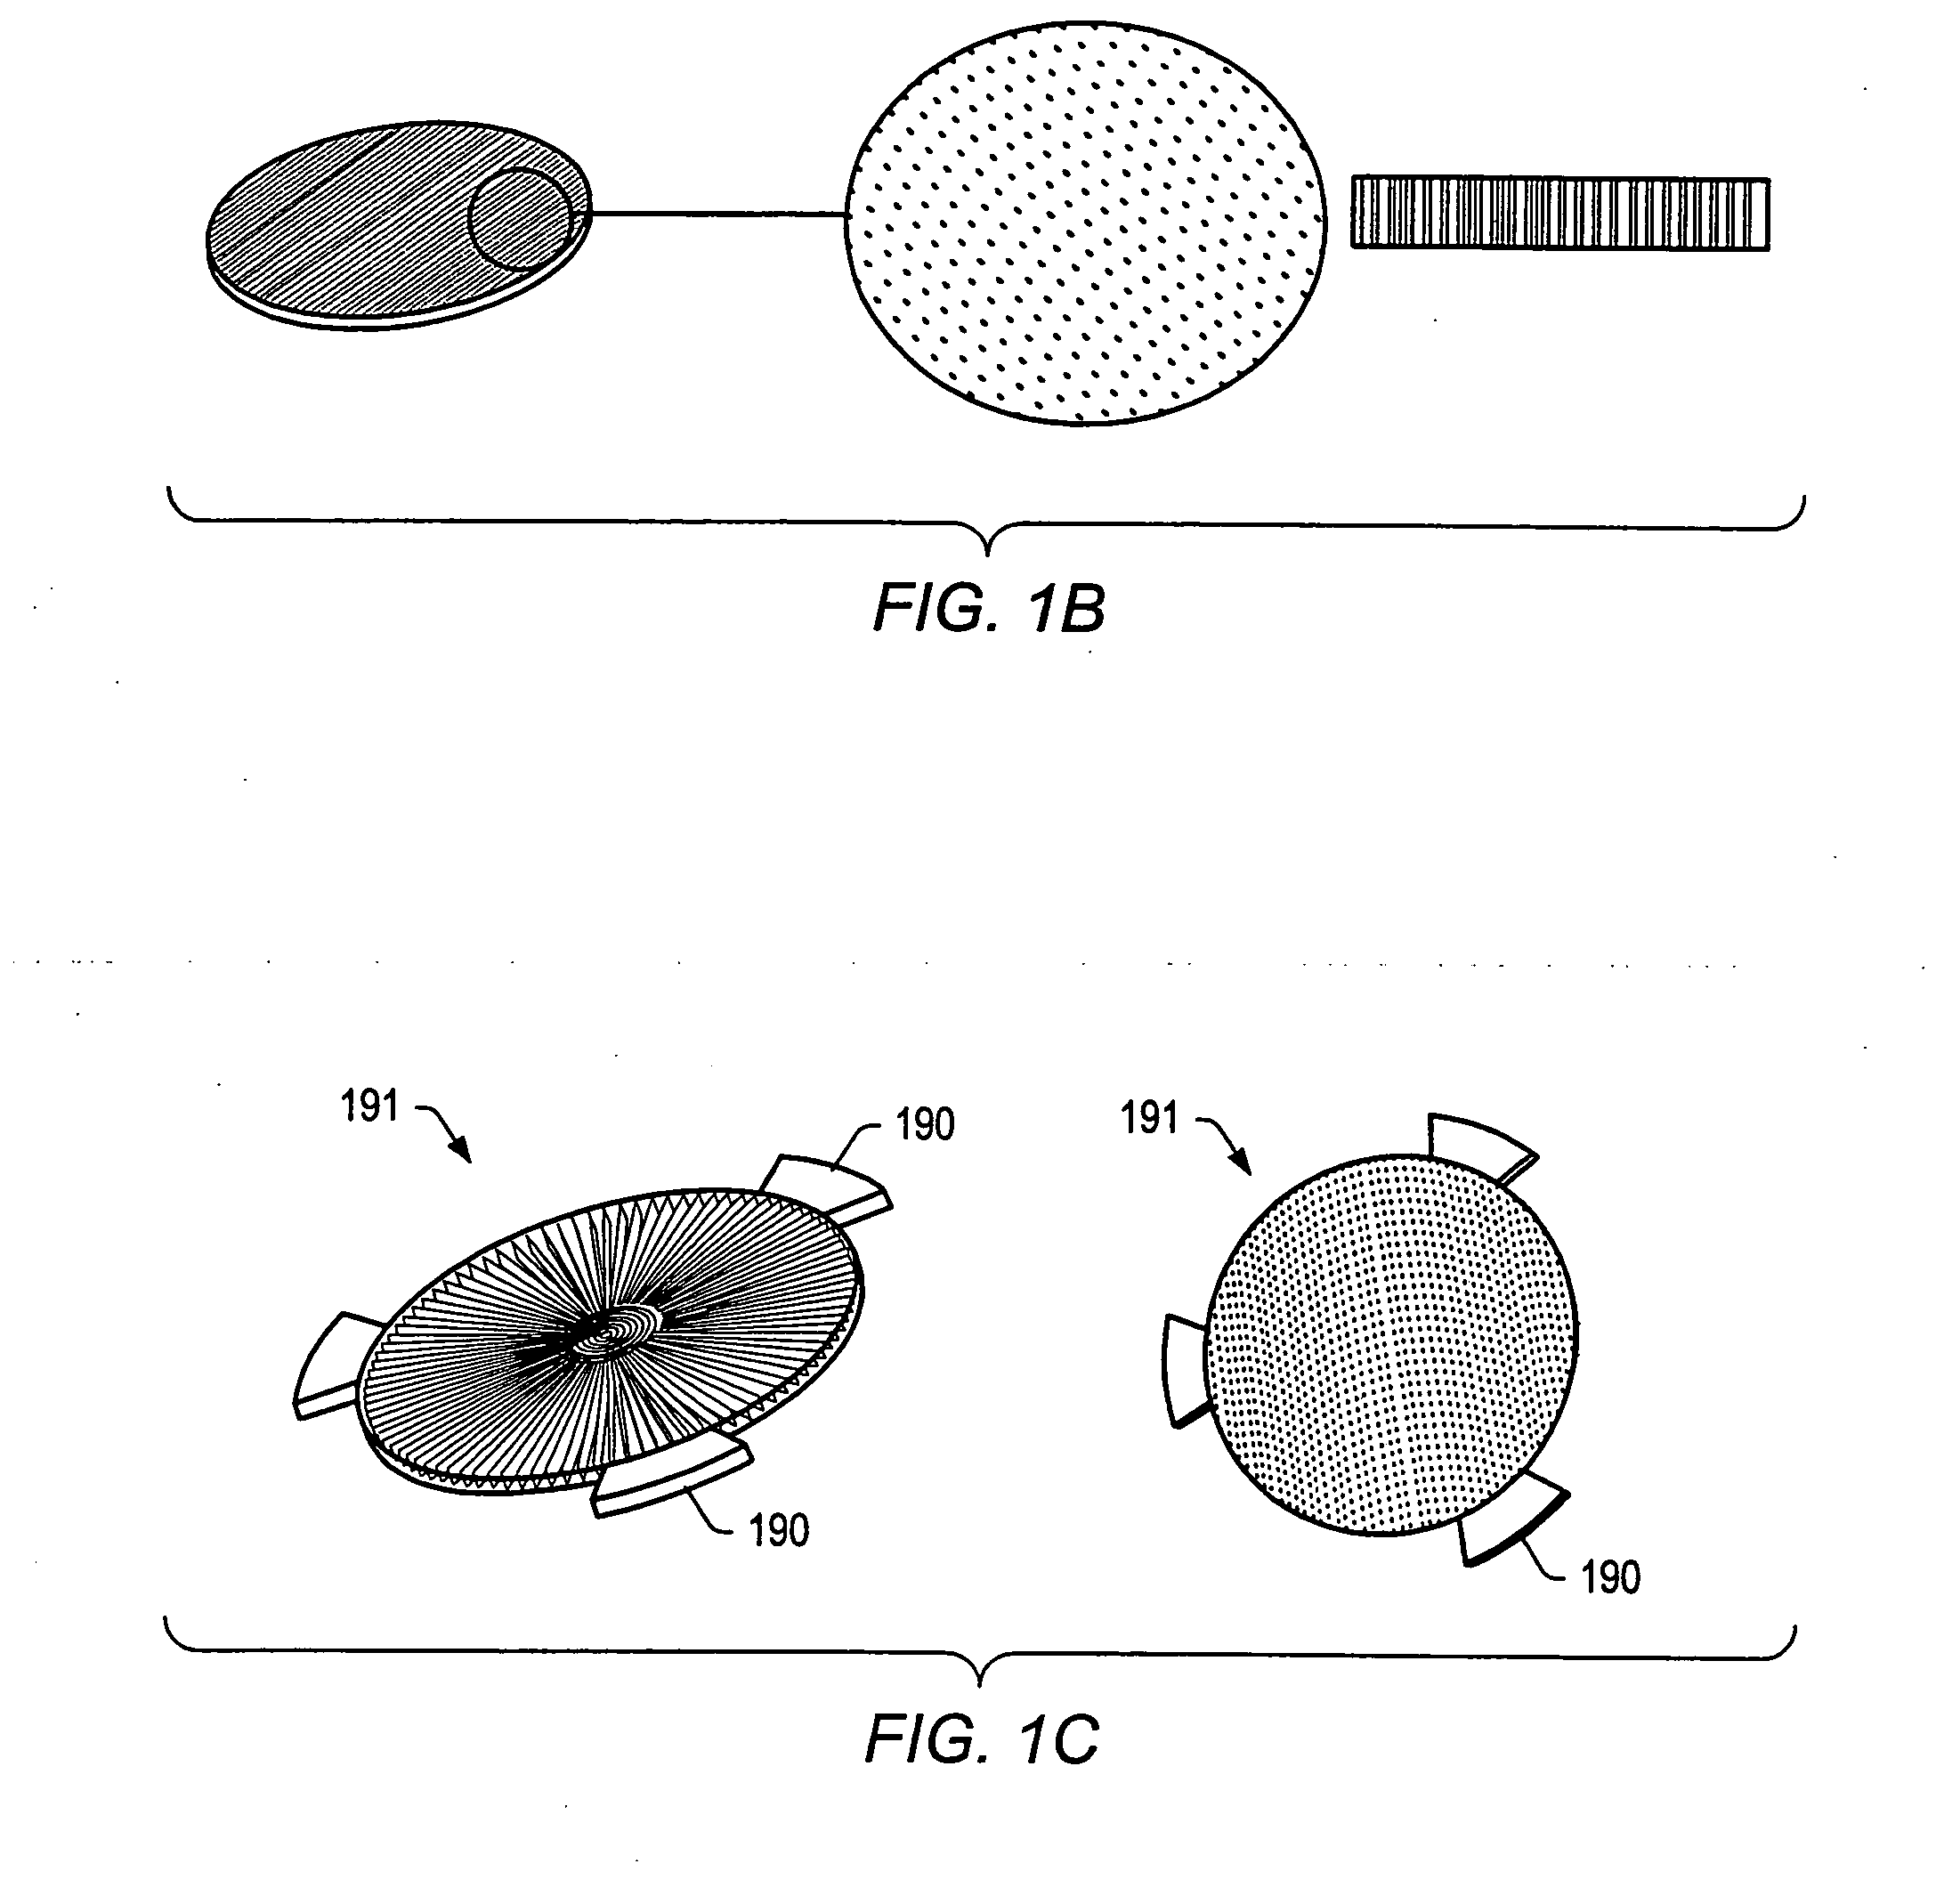 Integration of fluids and reagents into self-contained cartridges containing sensor elements and reagent delivery systems